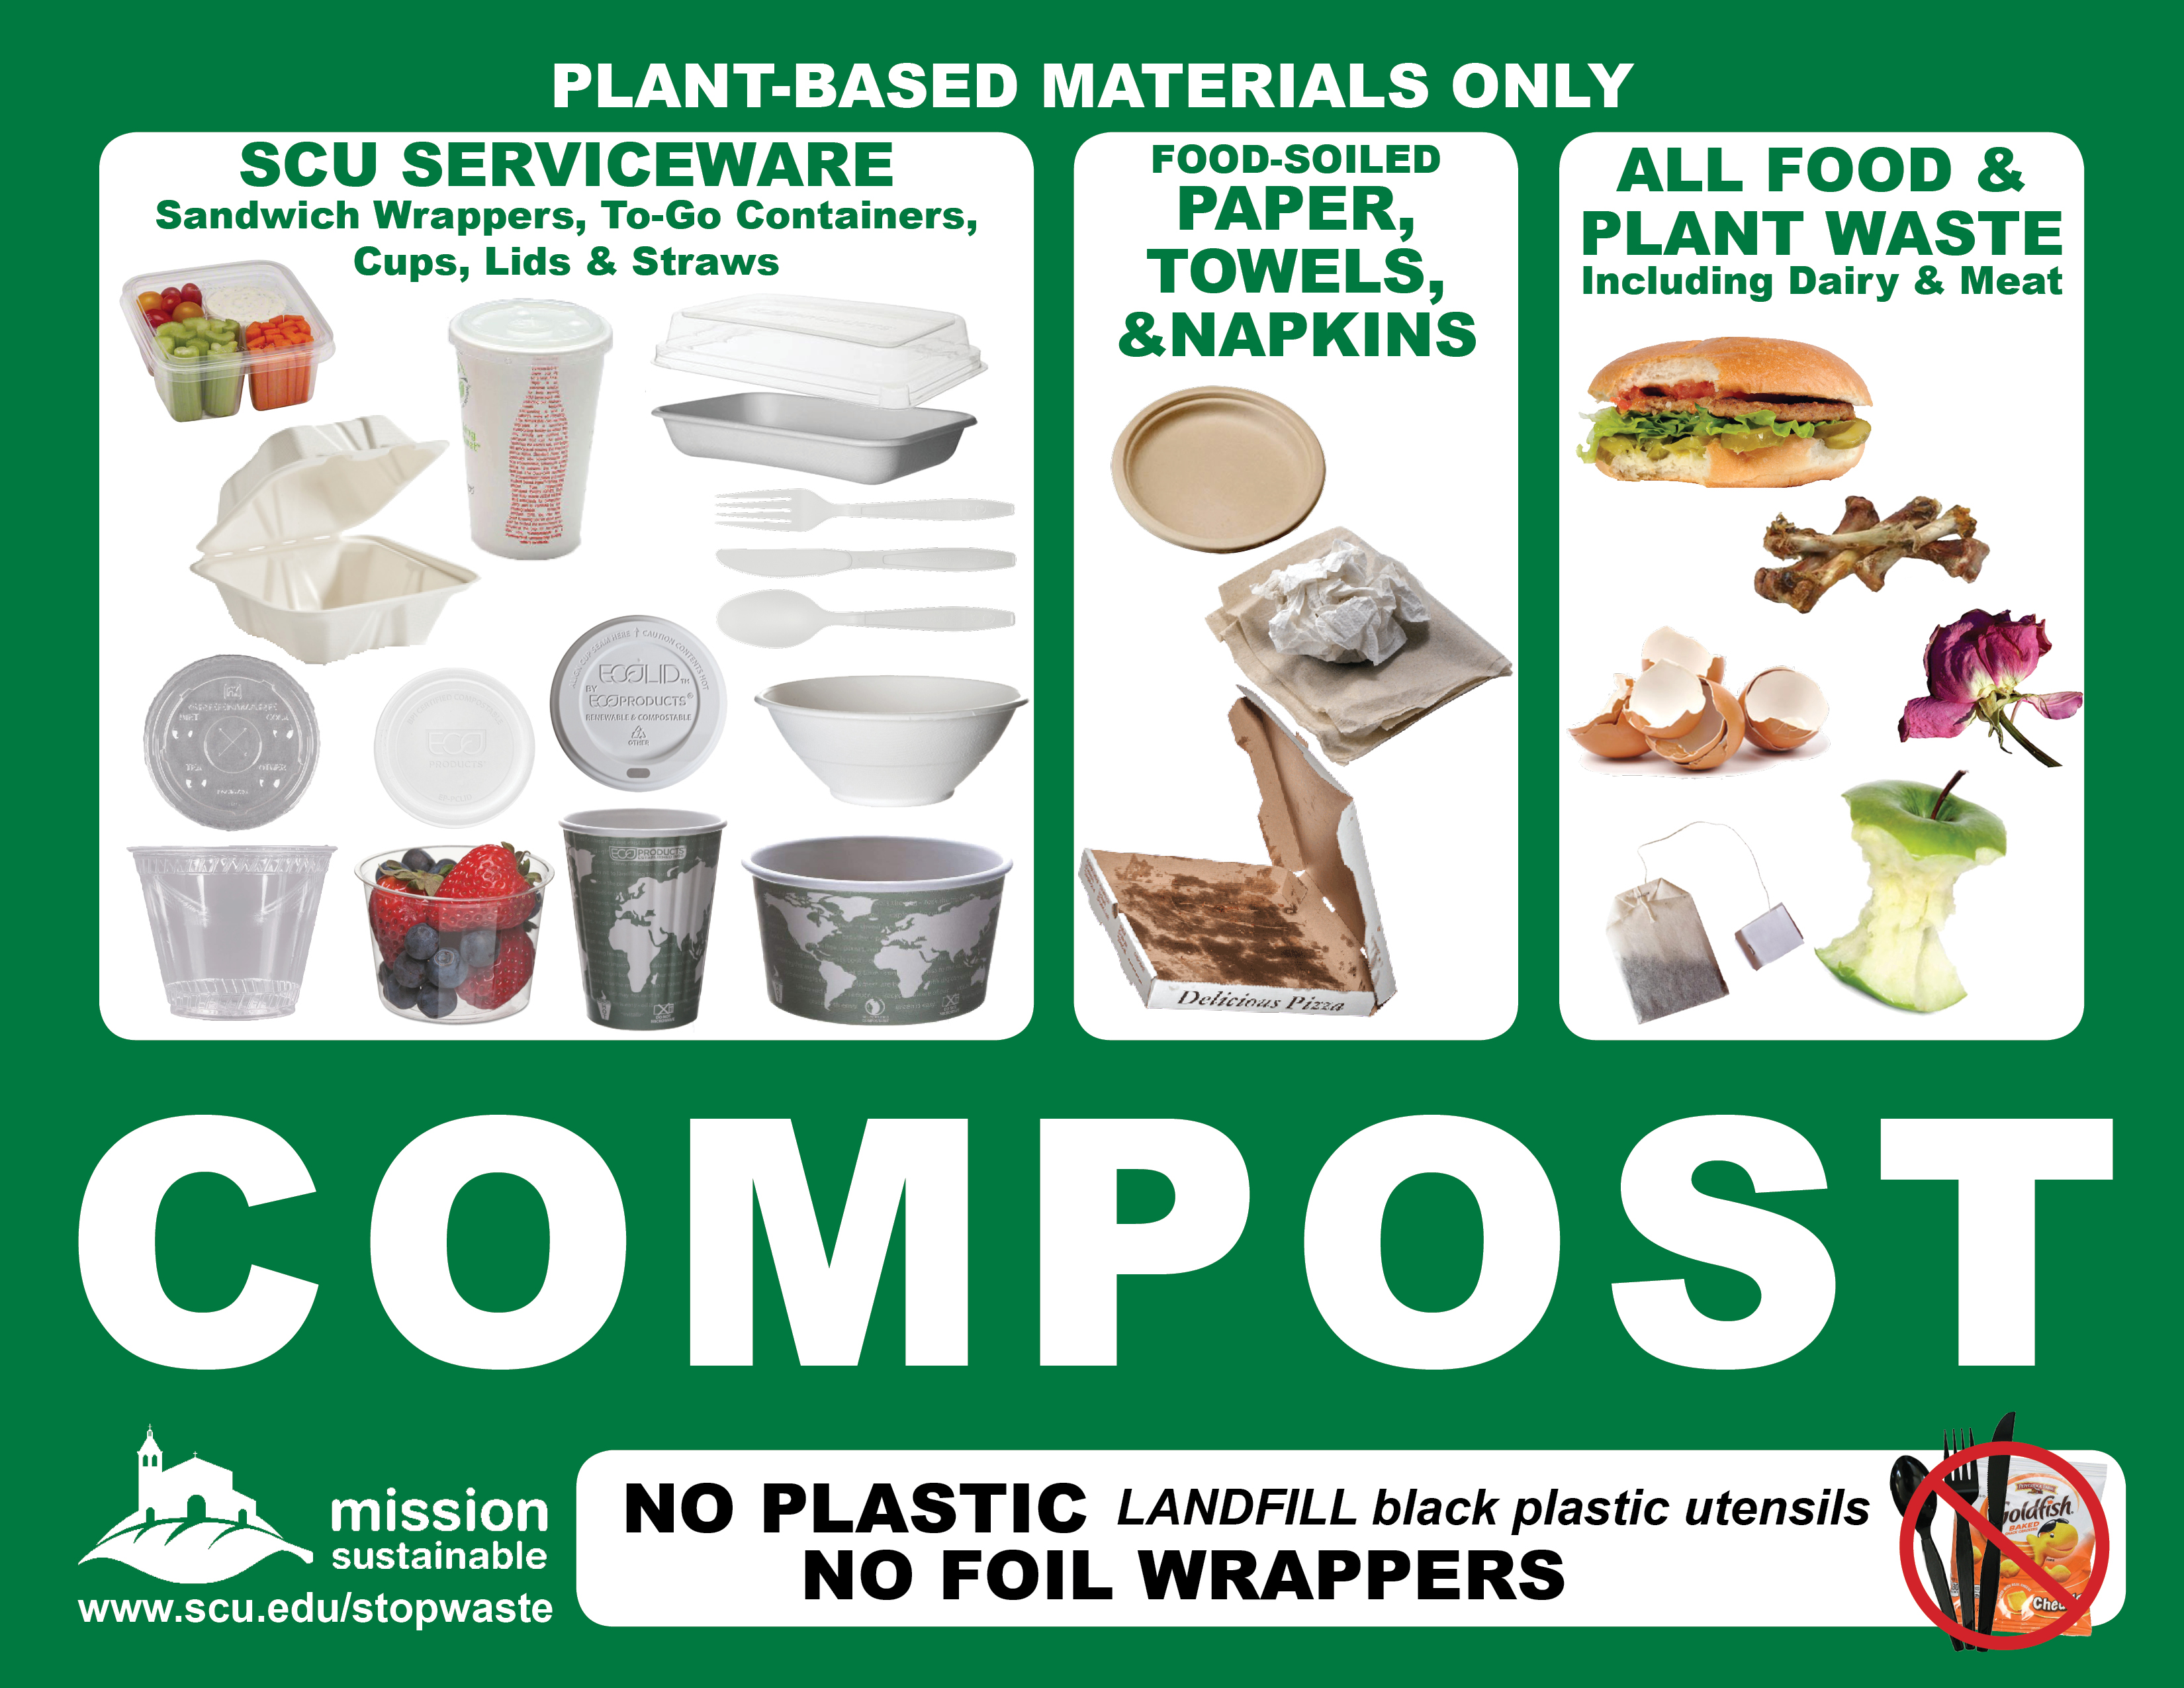 Sign showing food, SCU serviceware, and napkins that can be composted - Image of items that can be composted, such as food, SCU serviceware, and napkins Link to file